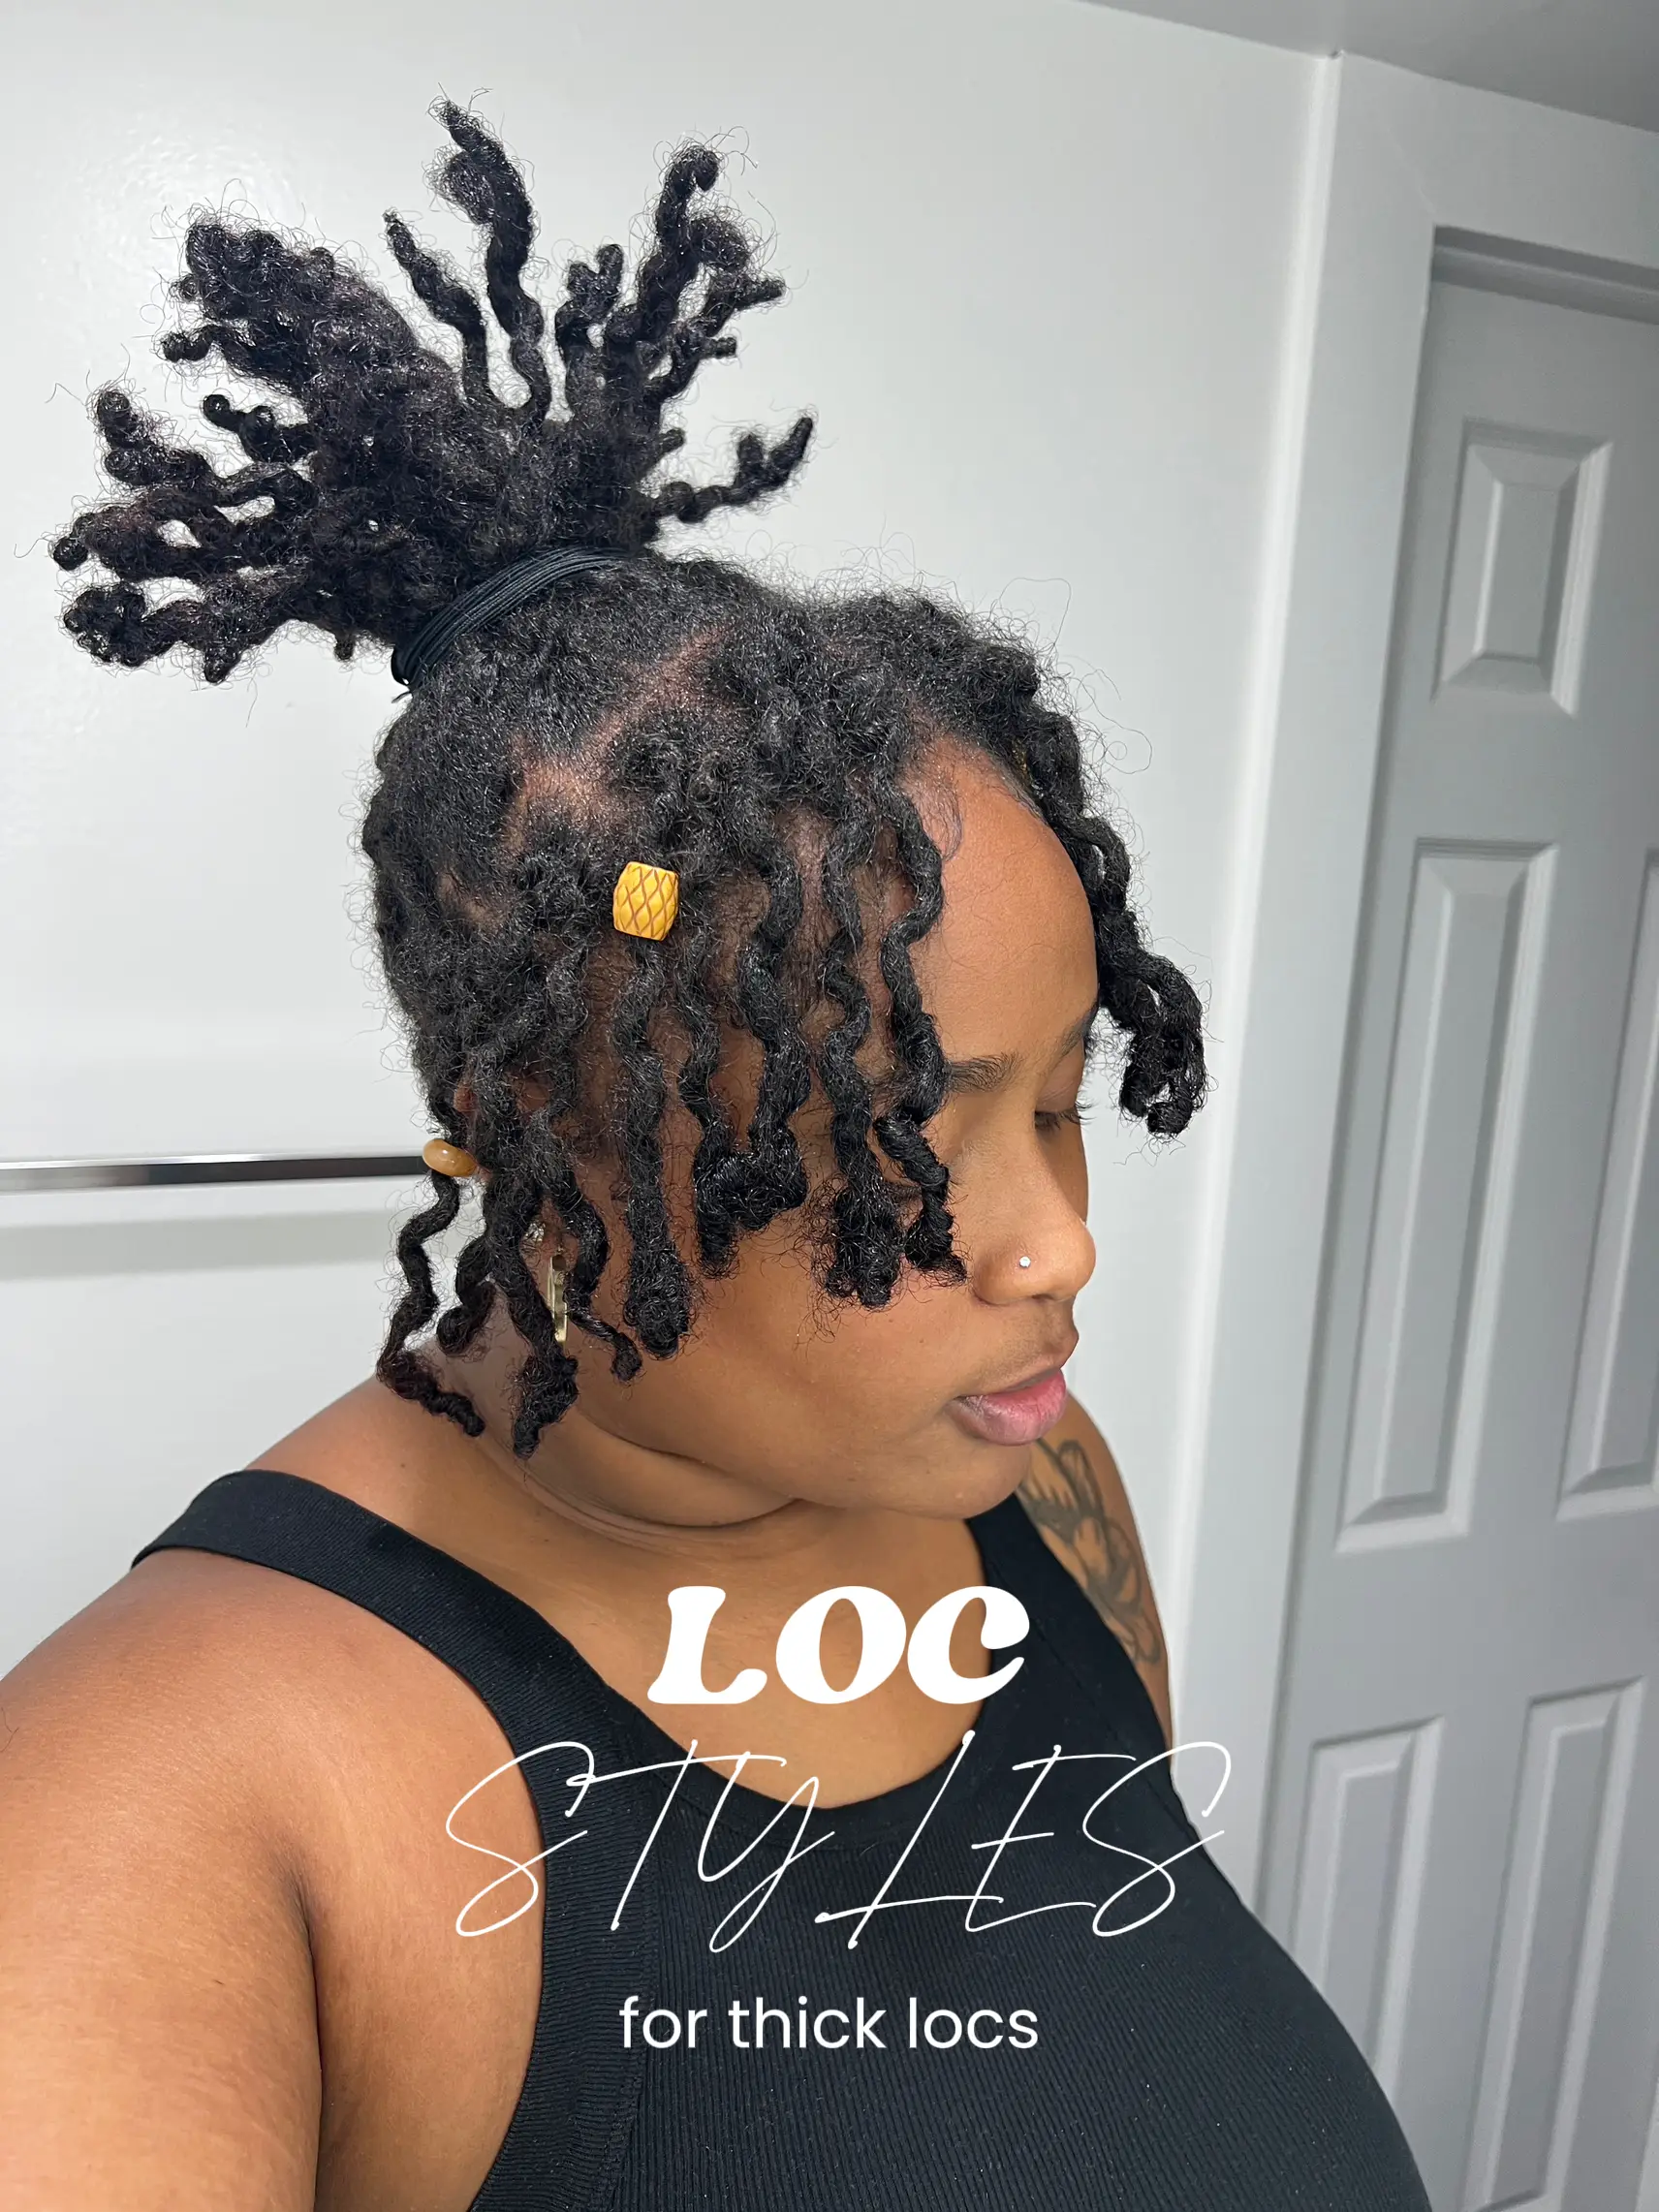 Loc Styles are Endless, Gallery posted by NNaturalHair